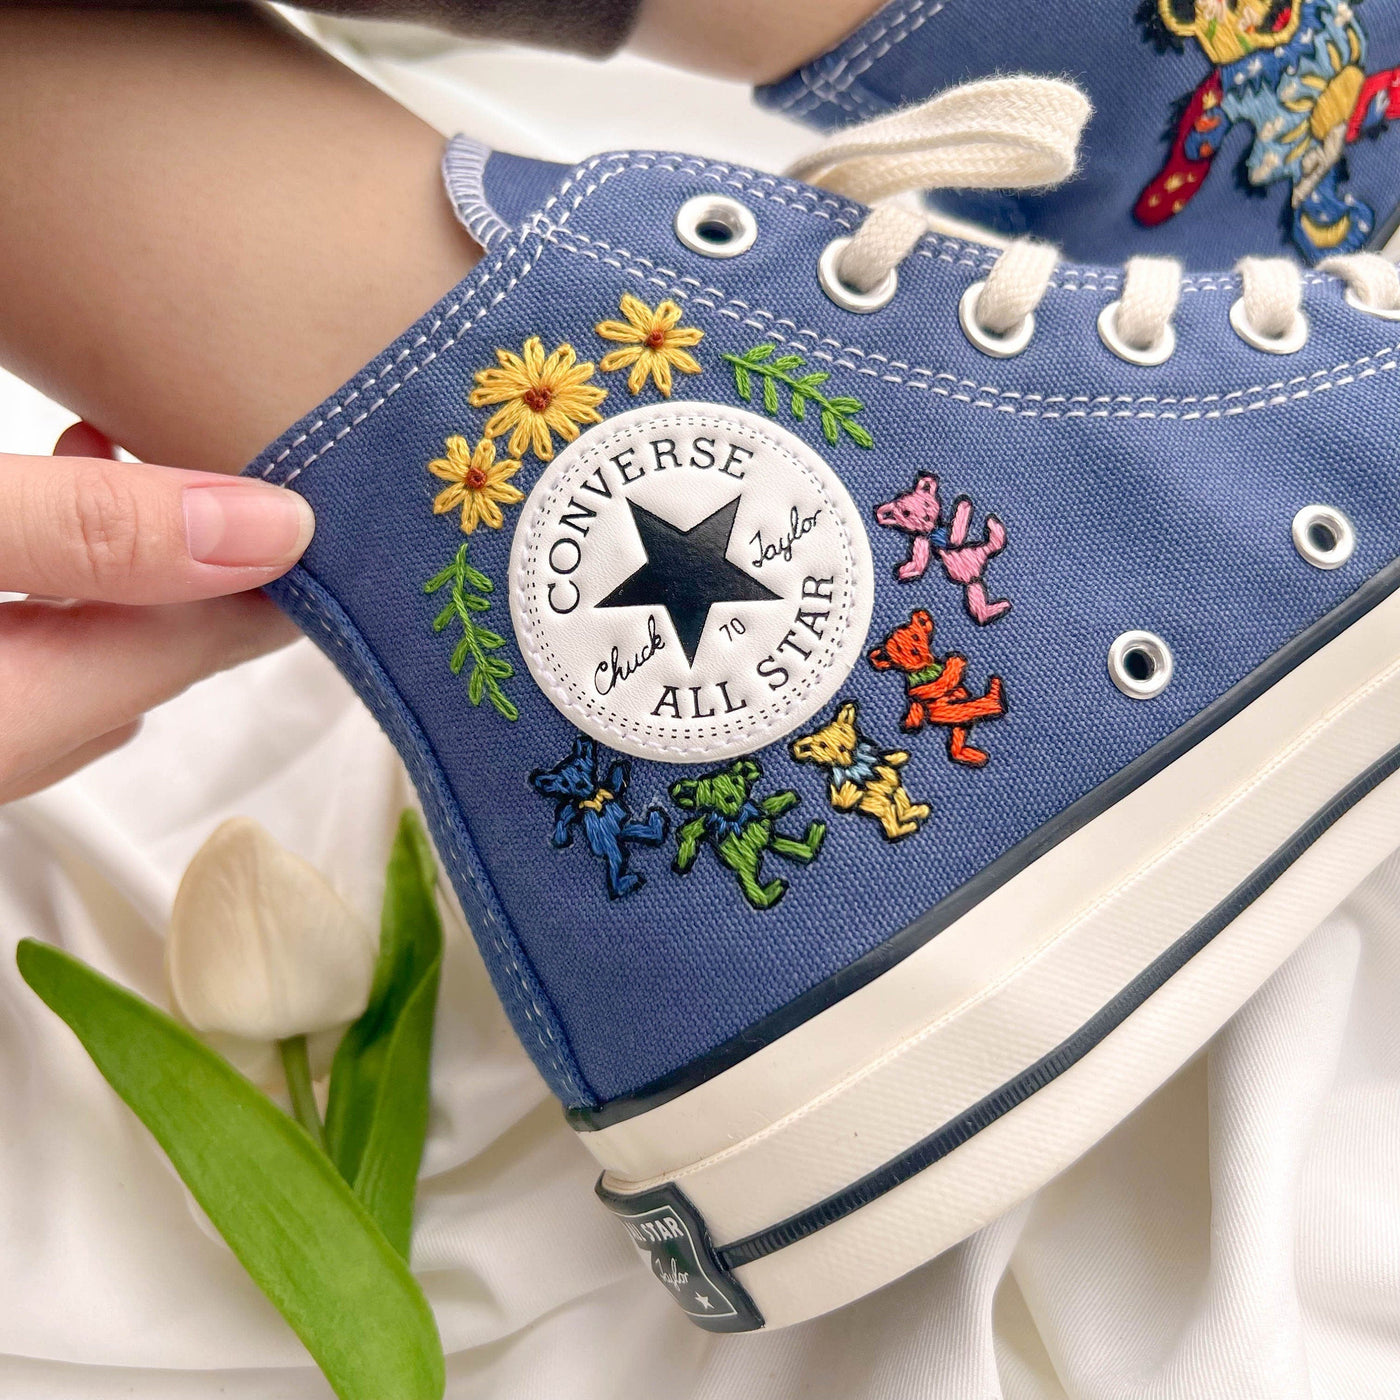 Embroidered Converse,Converse Hi Tops,Embroidered Colorful Bear